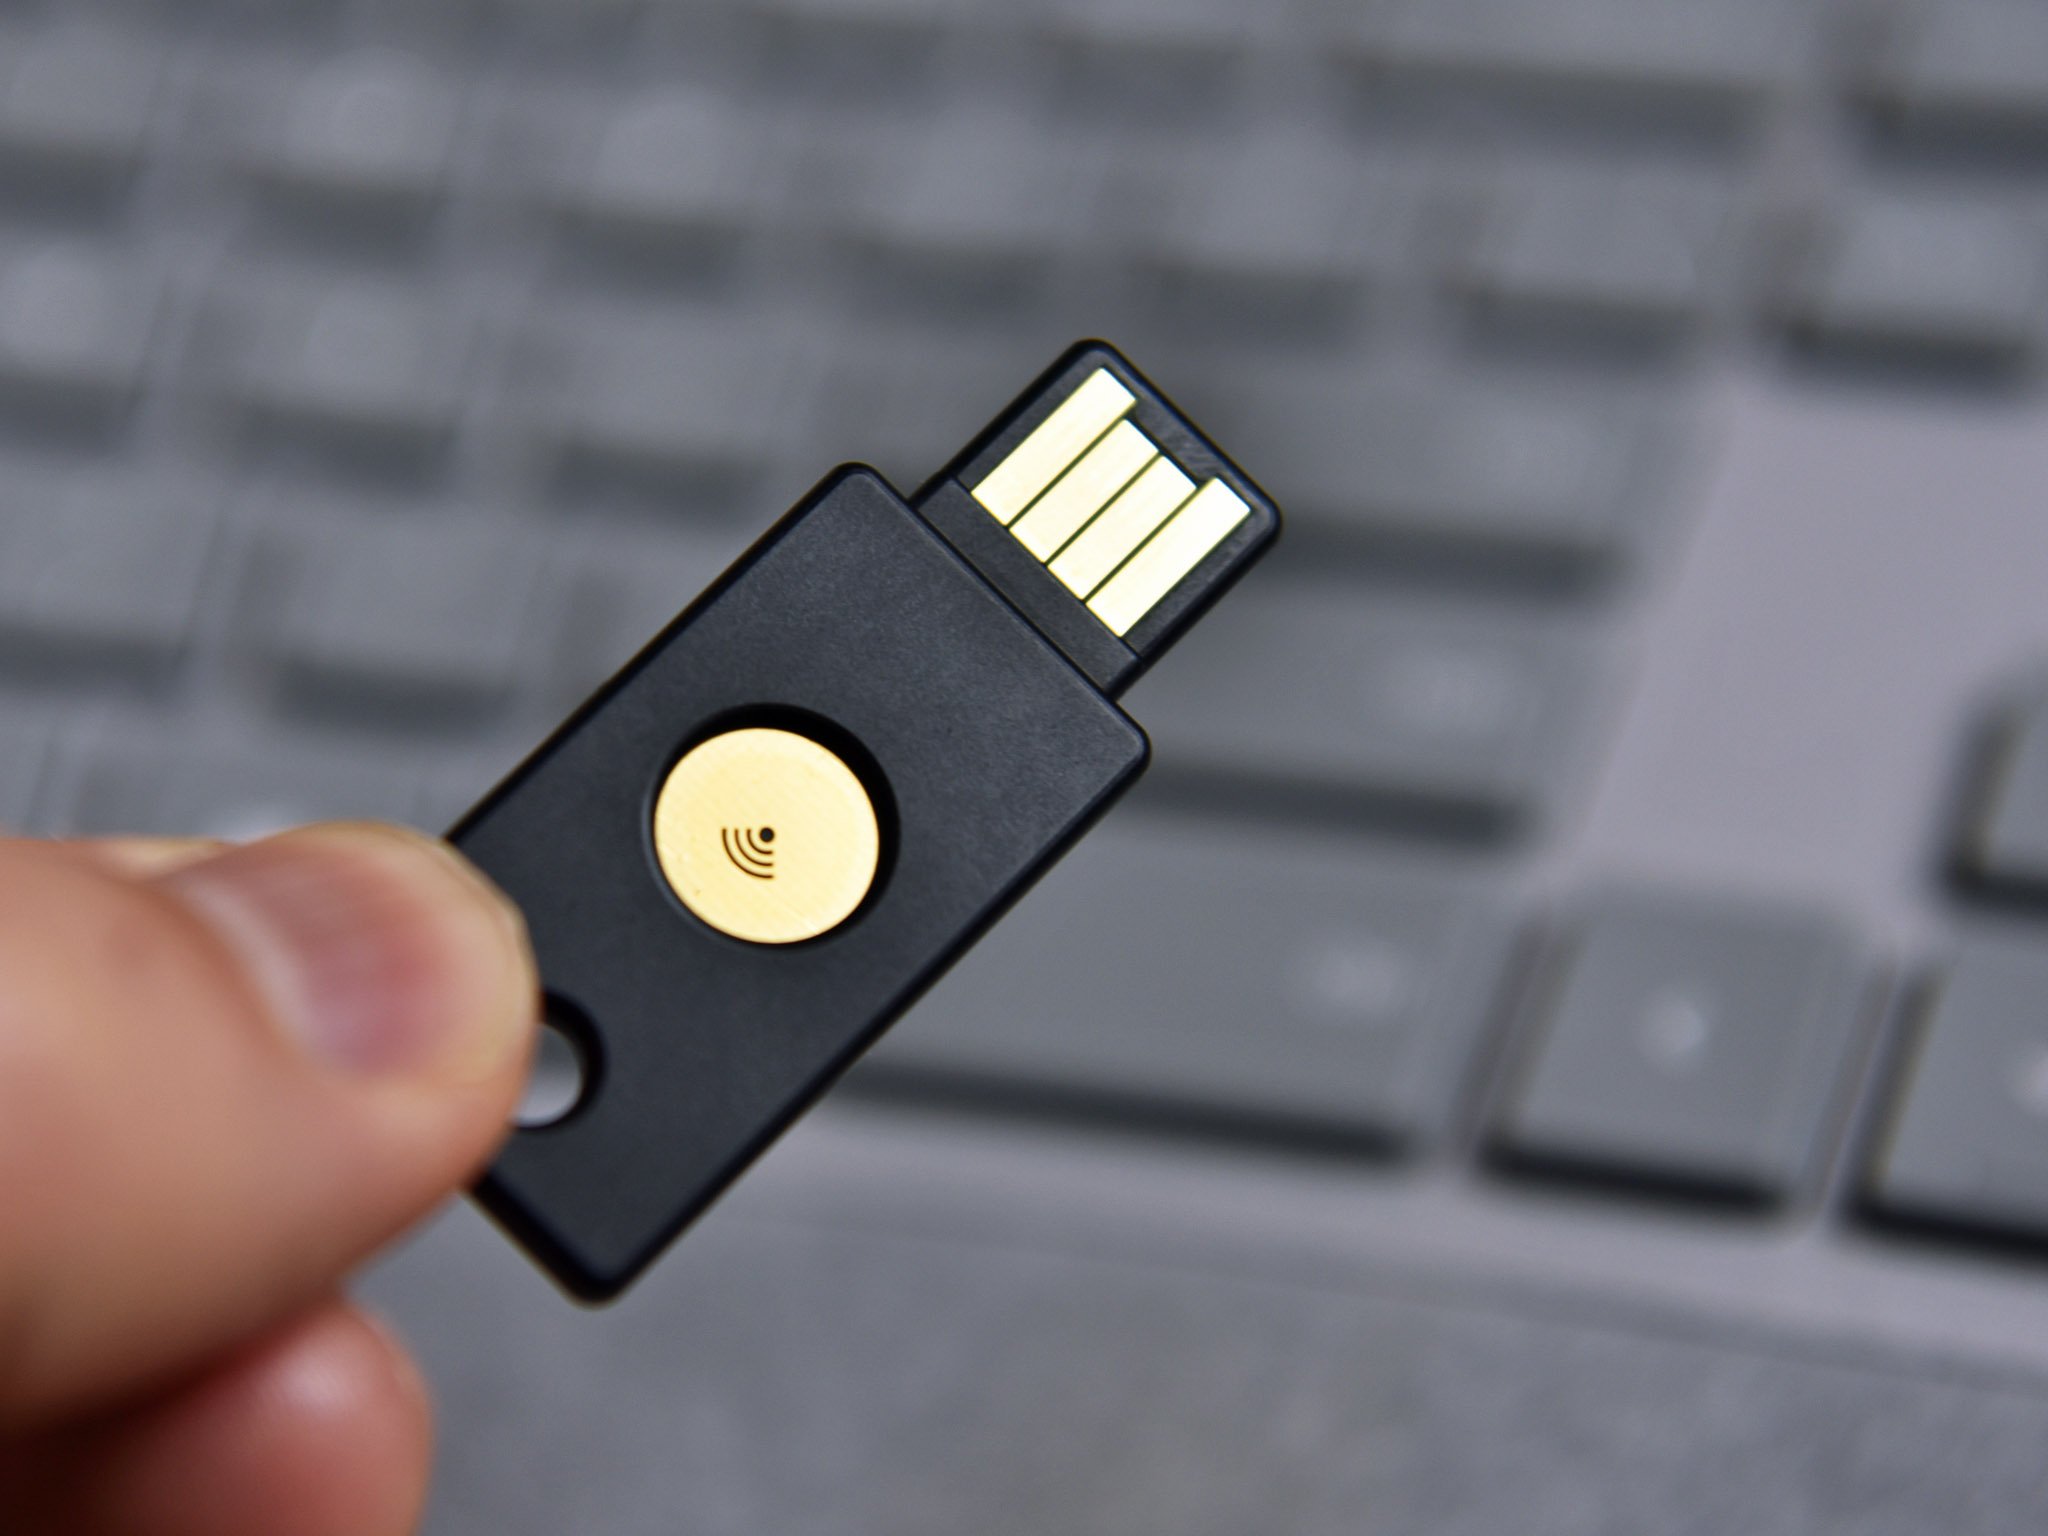 Microsoft accounts now let you ditch your password, sign in with a security key